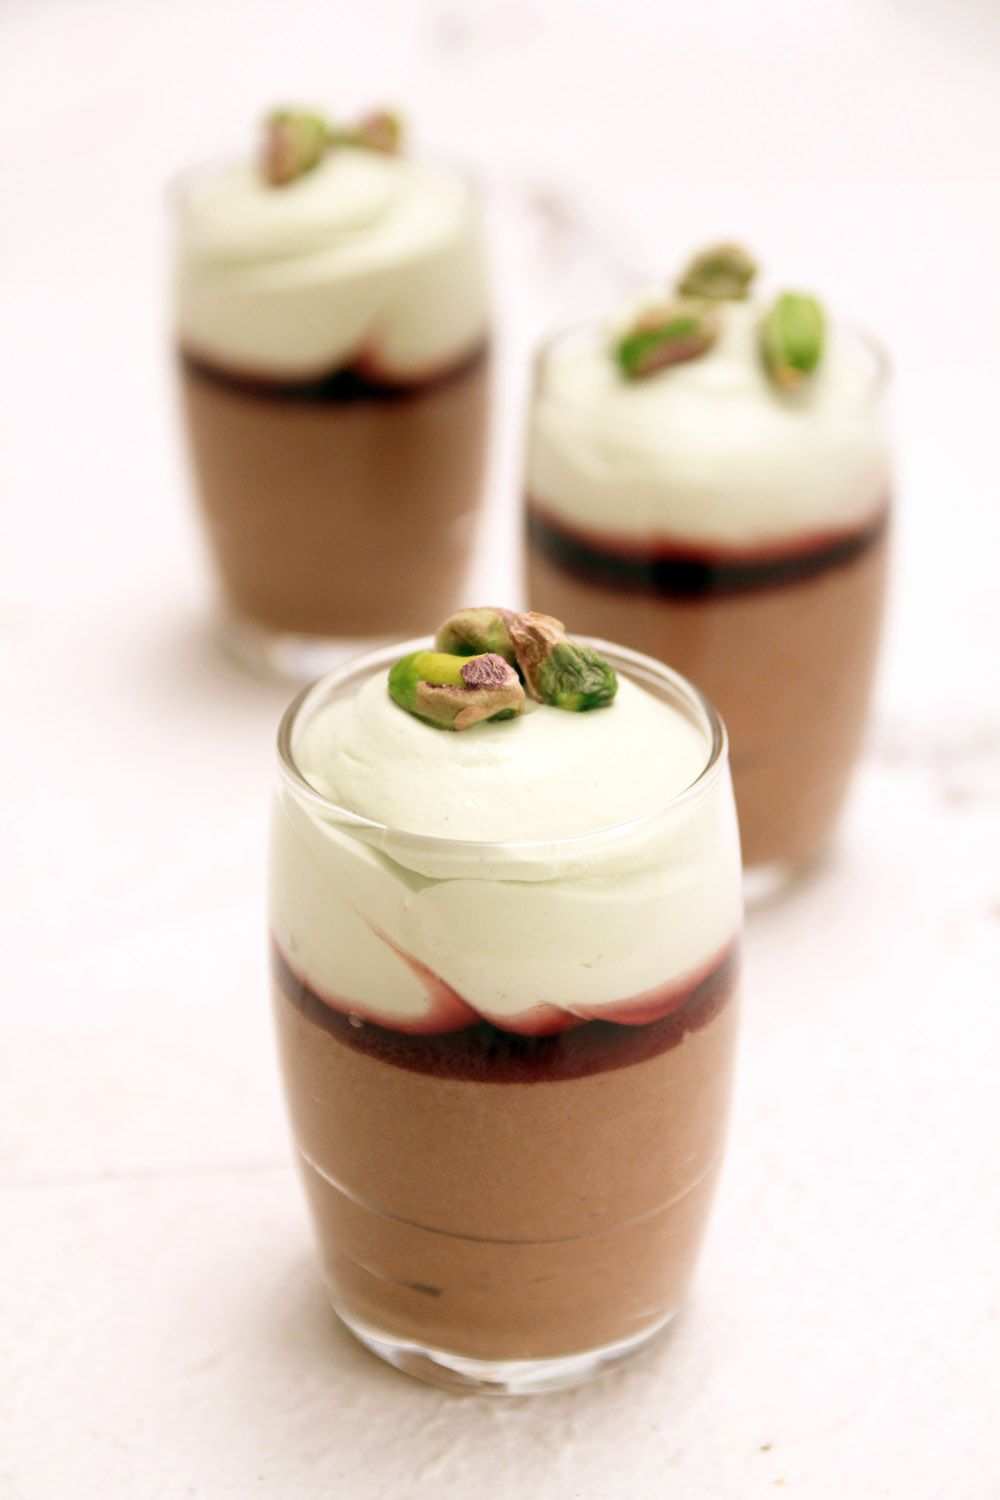 Chocolate Mousse Parfait with Cherries and Pistachio